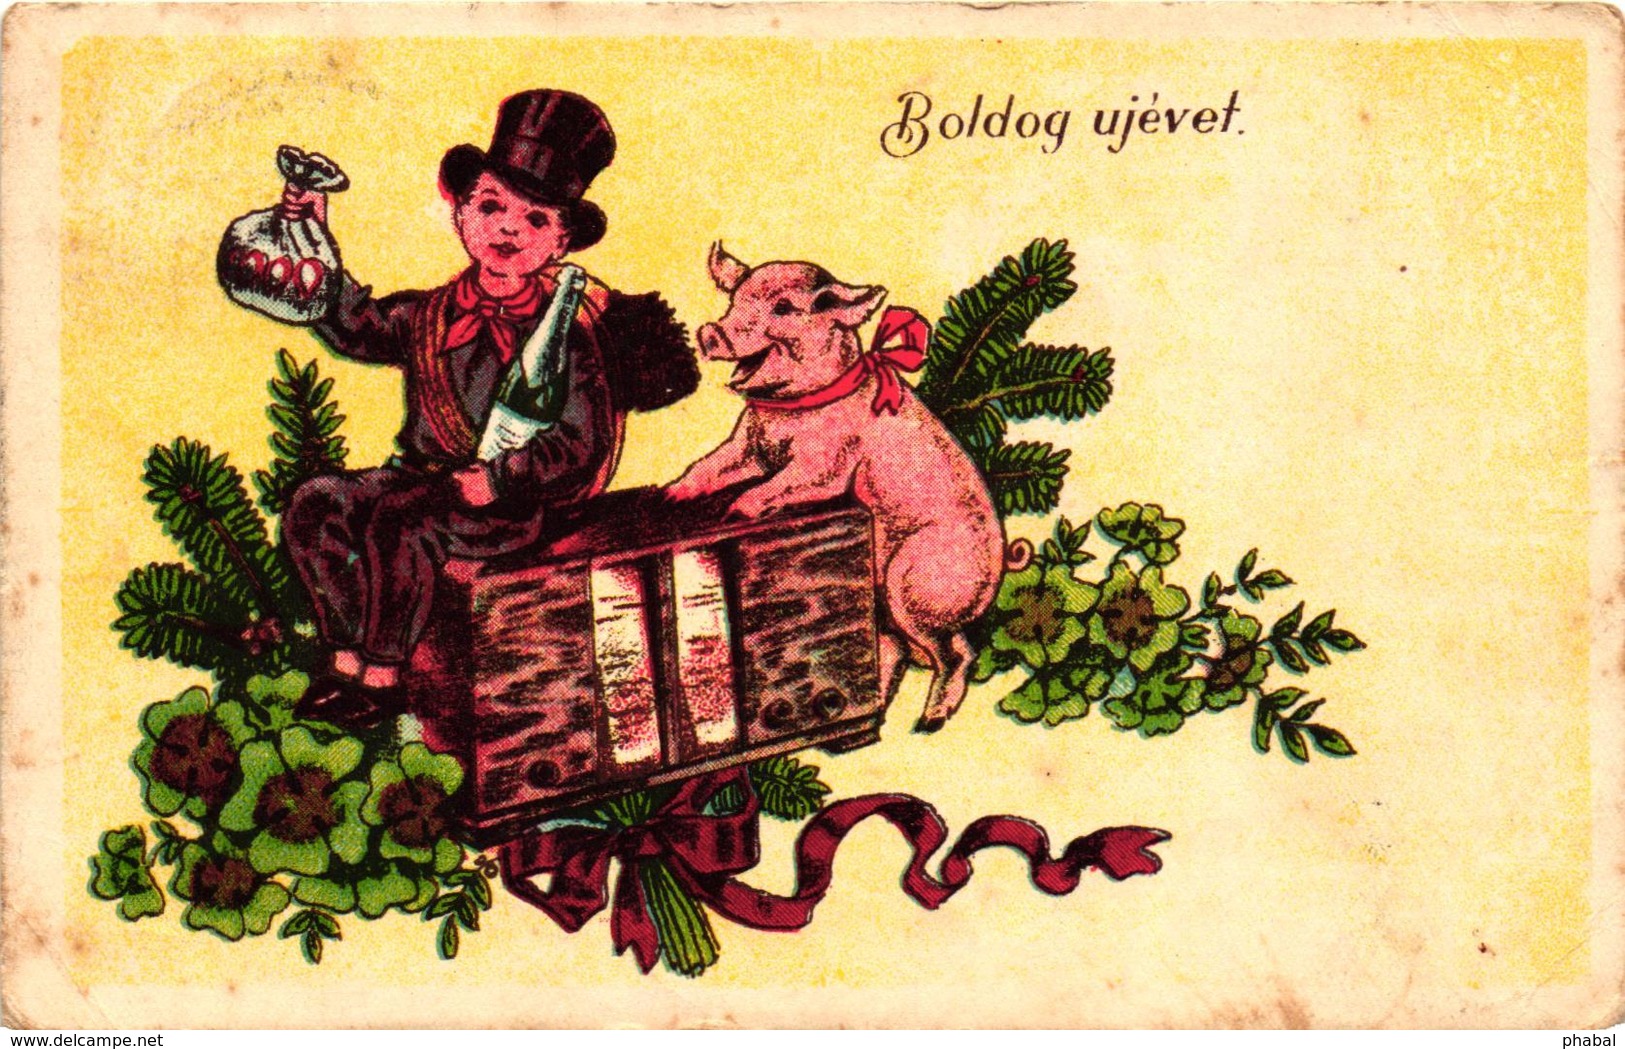 Pigs, Chimney Sweeper With A Pig And An Old Type Radio, New Year, Old Postcard - Pigs